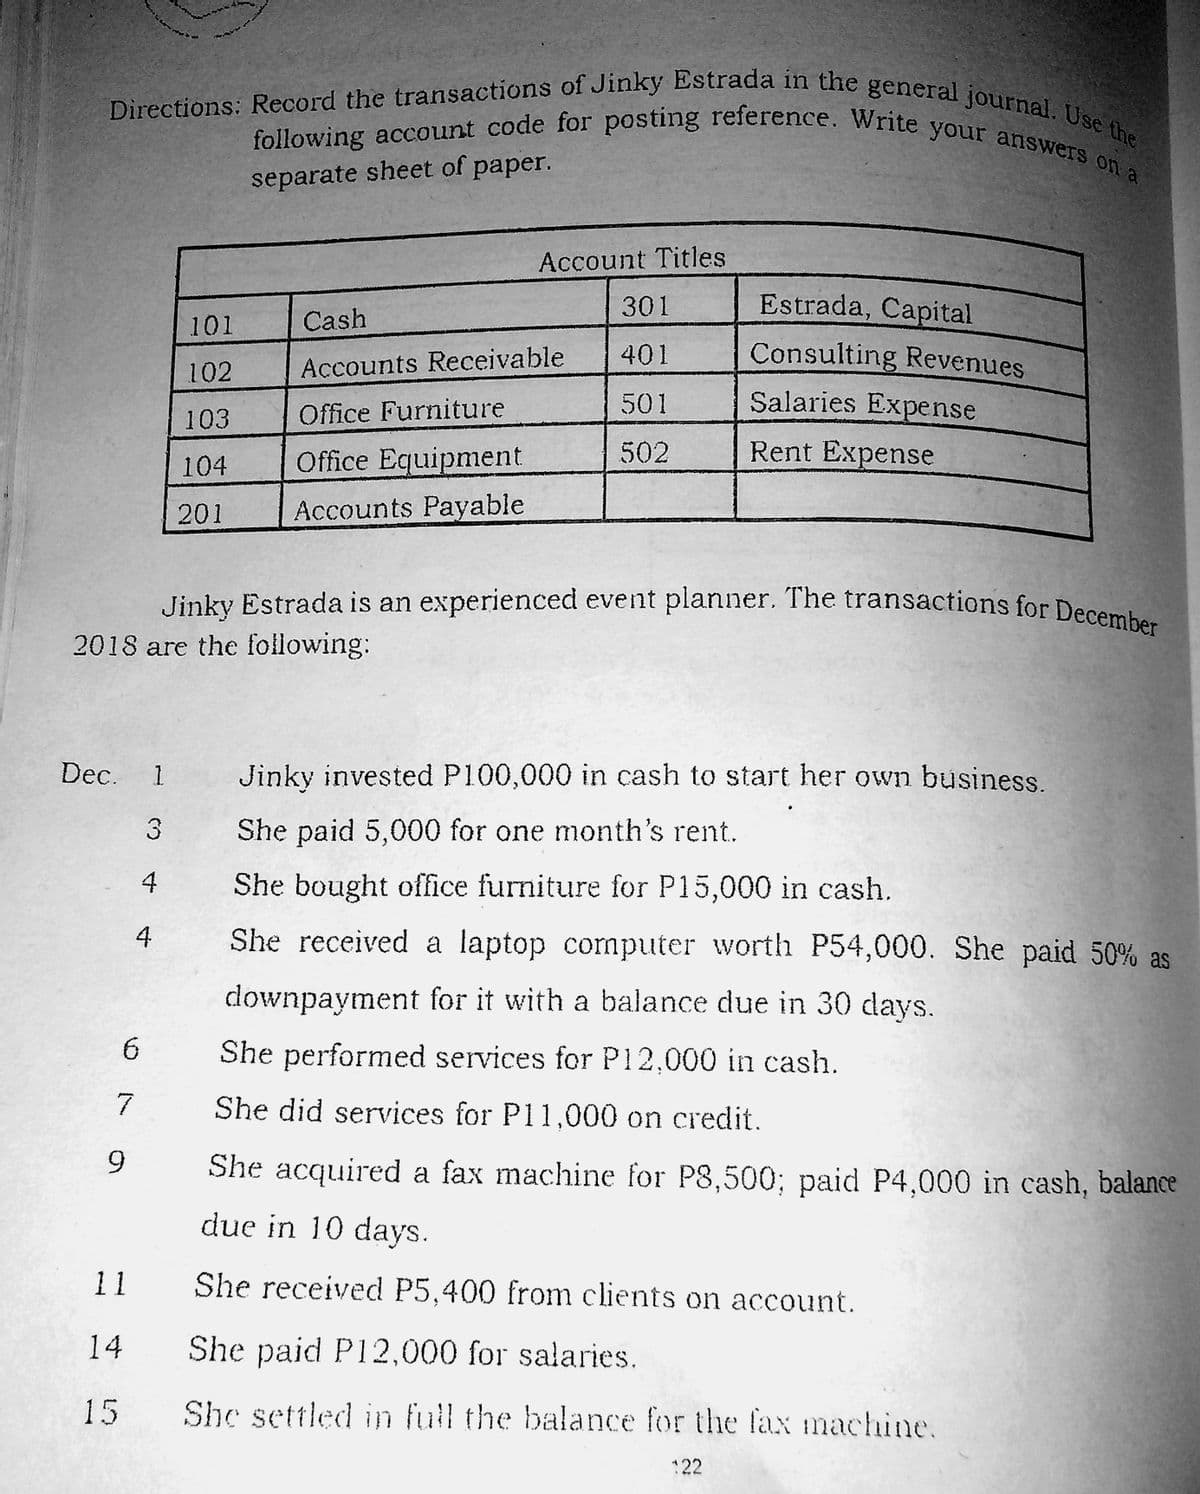 following account code for posting reference. Write your answers on a
Directions: Record the transactions of Jinky Estrada in the general journal. Use the
Jinky Estrada is an experienced event planner. The transactions for December
separate sheet of paper.
Account Titles
301
Estrada, Capital
101
Cash
Consulting Revenues
Salaries Expense
401
102
Accounts Receivable
501
103
Office Furniture
Office Equipment
502
Rent Expense
104
201
Accounts Payable
2018 are the following:
Dec. 1
Jinky invested P100,000 in cash to start her own business.
3
She paid 5,000 for one month's rent.
4
She bought office furniture for P15,000 in cash.
4
She received a laptop computer worth P54,000. She paid 50% as
downpayment for it with a balance due in 30 days.
She performed services for P12,000 in cash.
7
She did services for P11,000 on credit.
She acquired a fax machine for P8,500; paid P4,000 in cash, balance
due in 10 days.
11
She received P5,400 from clients on account.
14
She paid P12,000 for salaries.
15
She settled in full the balance for the faxX machine.
22
